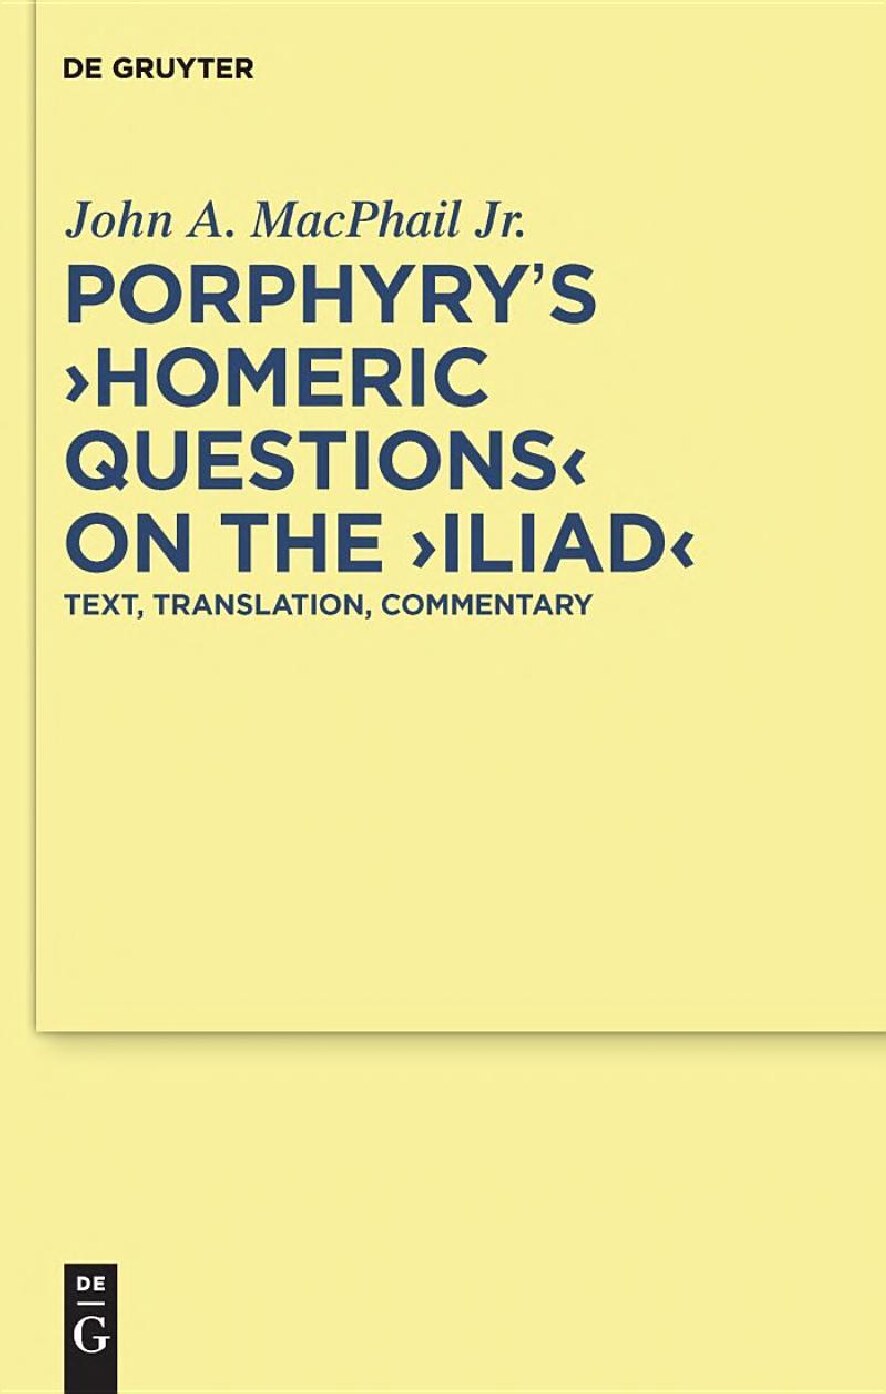 Porphyry's >Homeric Questions< on the >Iliad<